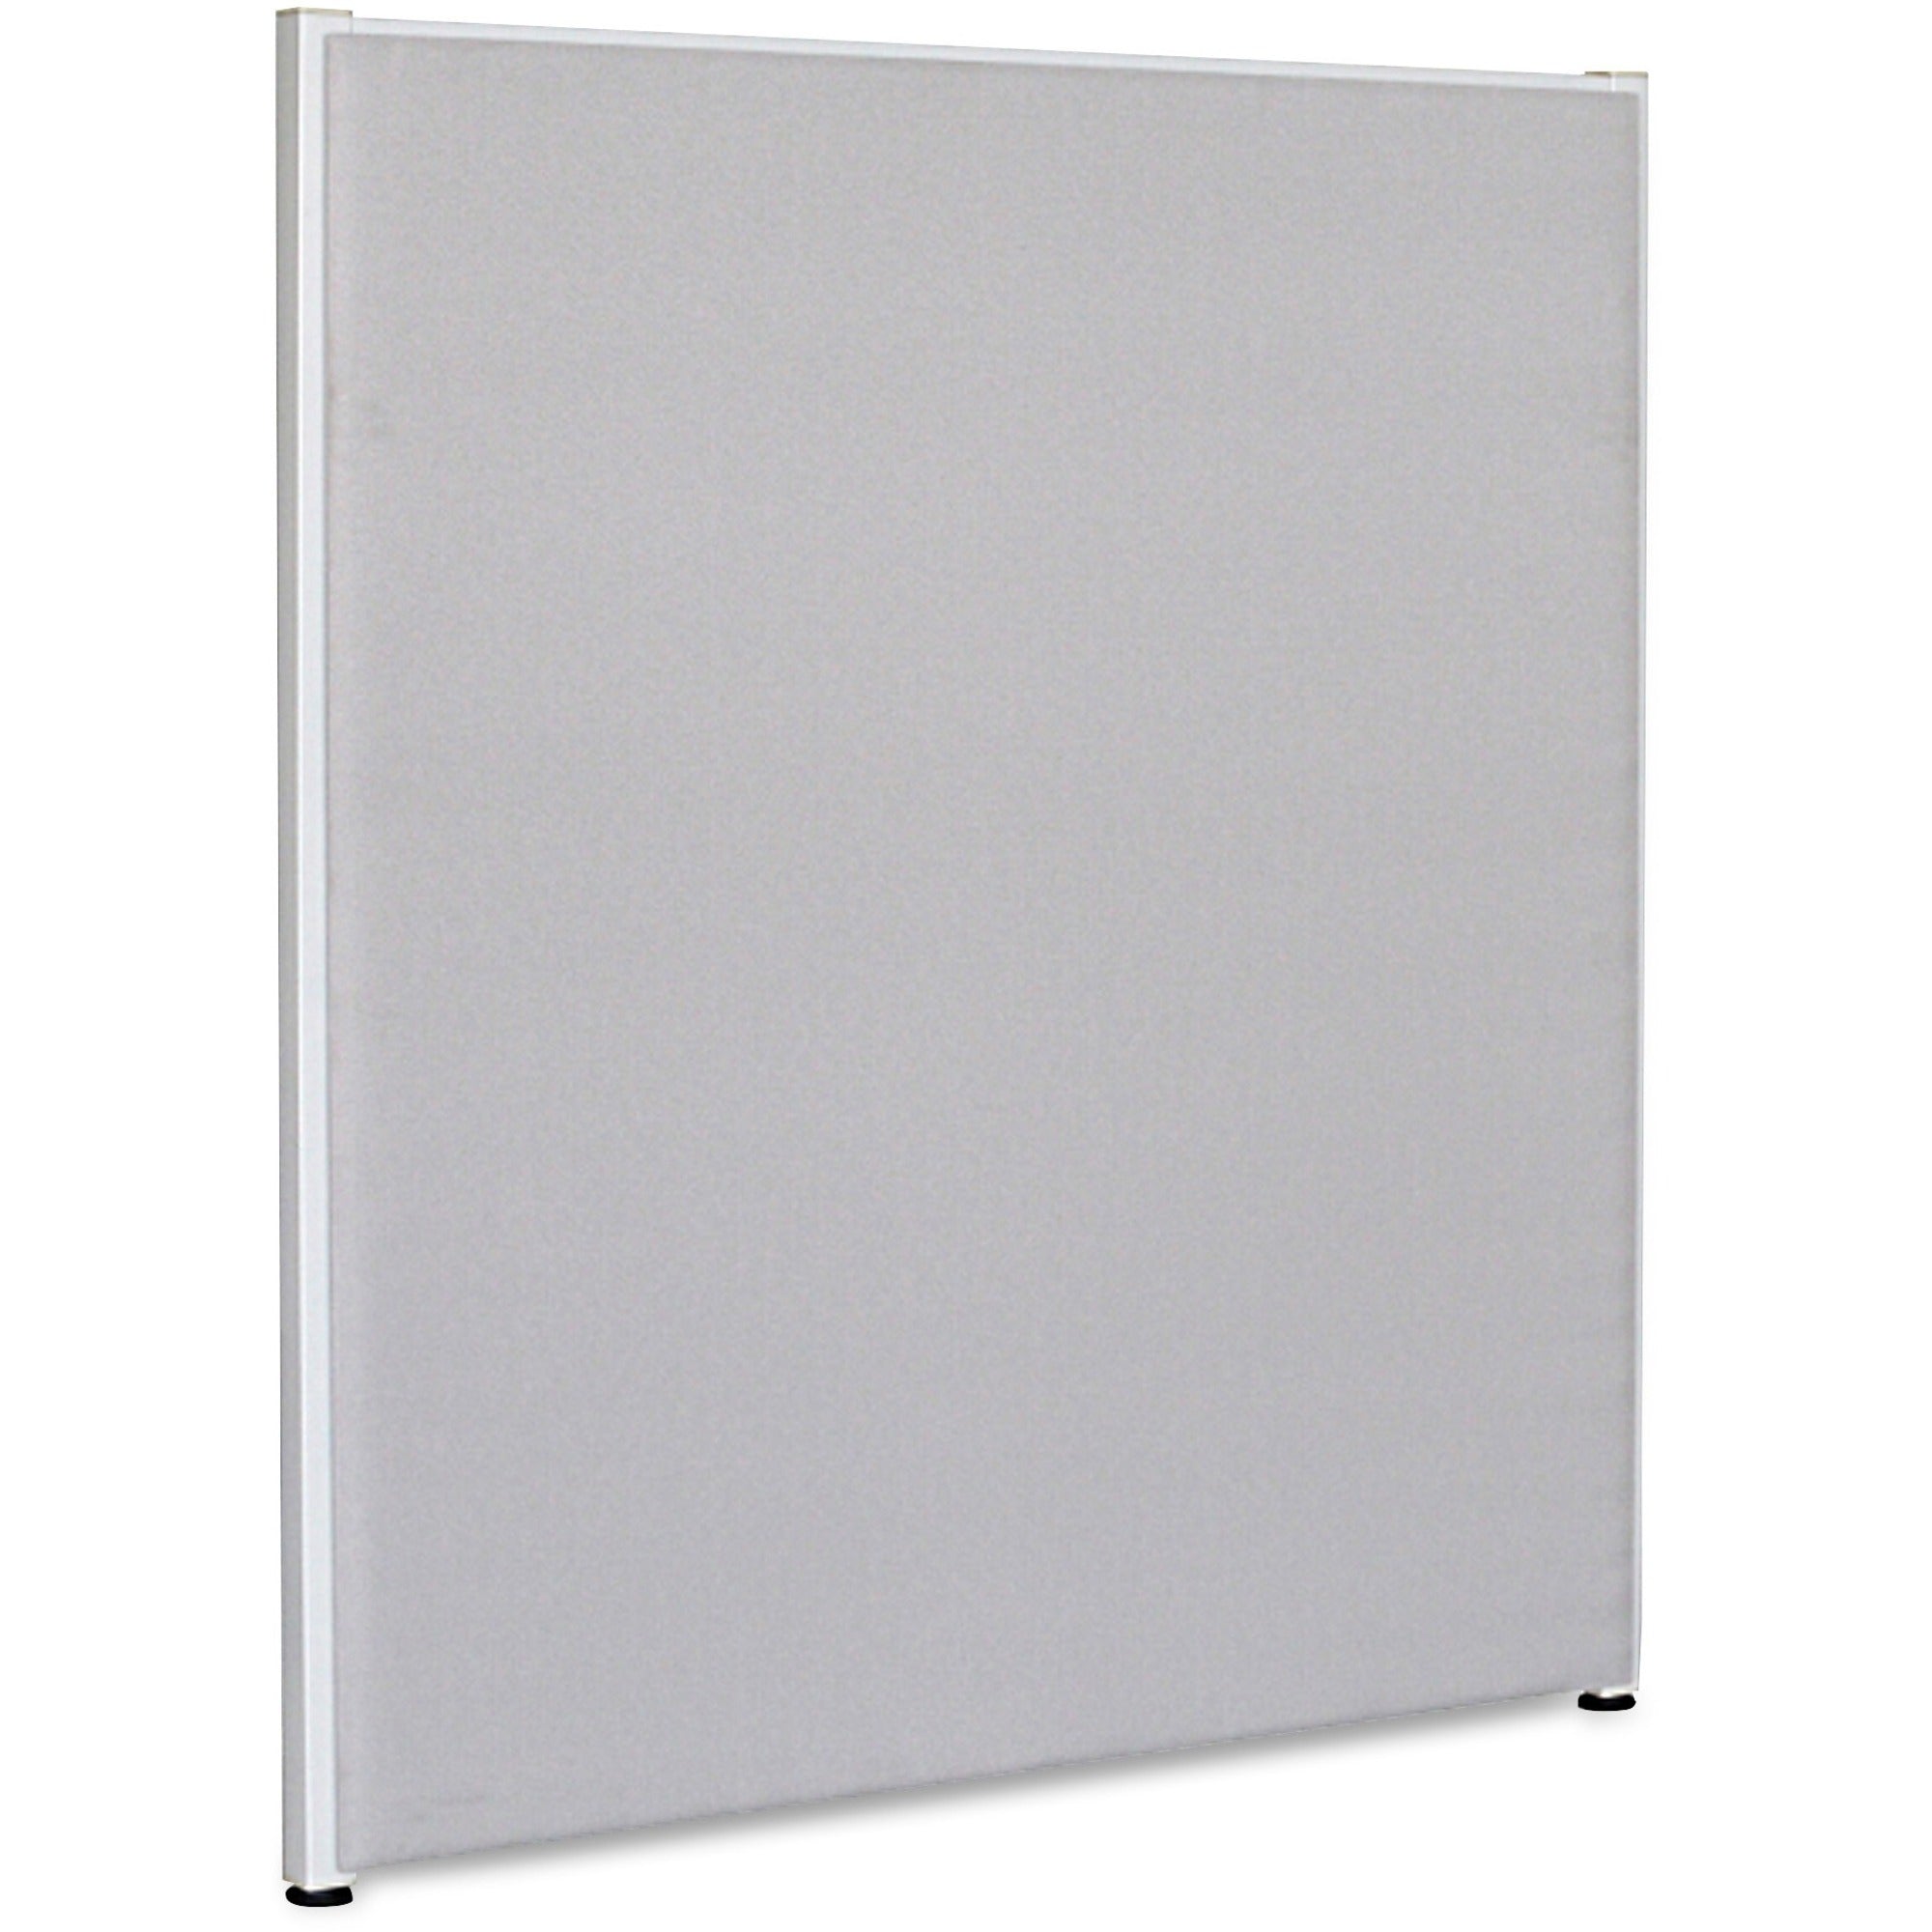 lorell-panel-system-partition-fabric-panel-36-width-x-48-height-fabric-steel-gray-1-each_llr90267 - 1